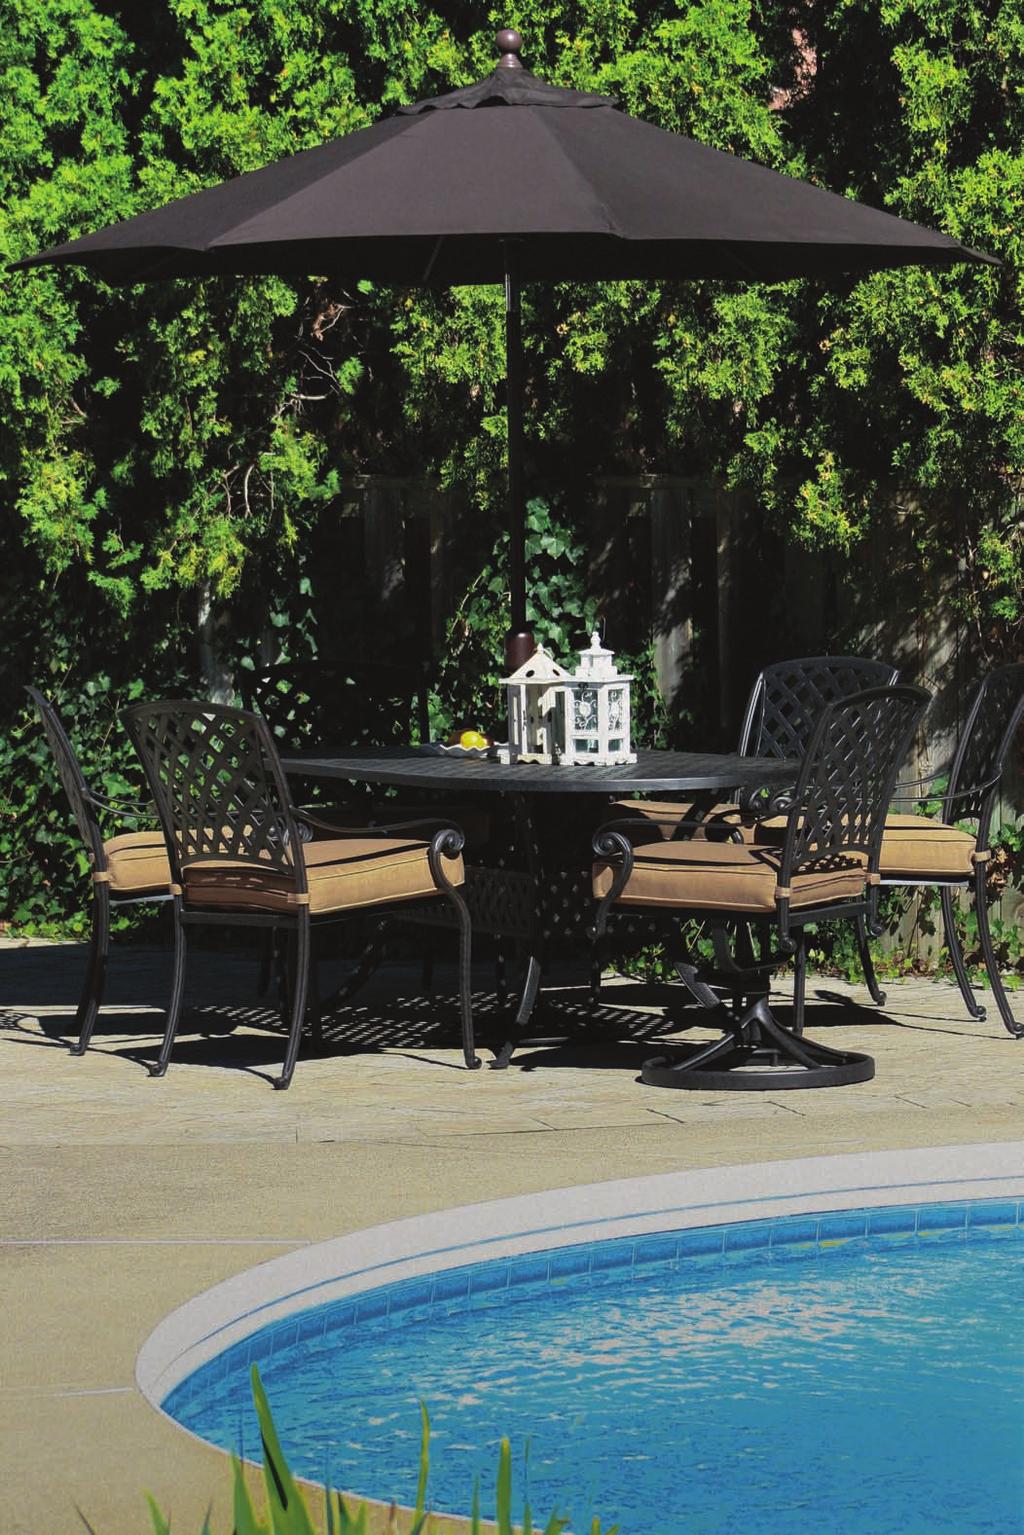 Easy to clean and with a little armrest flare, the cast aluminum chairs are the perfect compliment